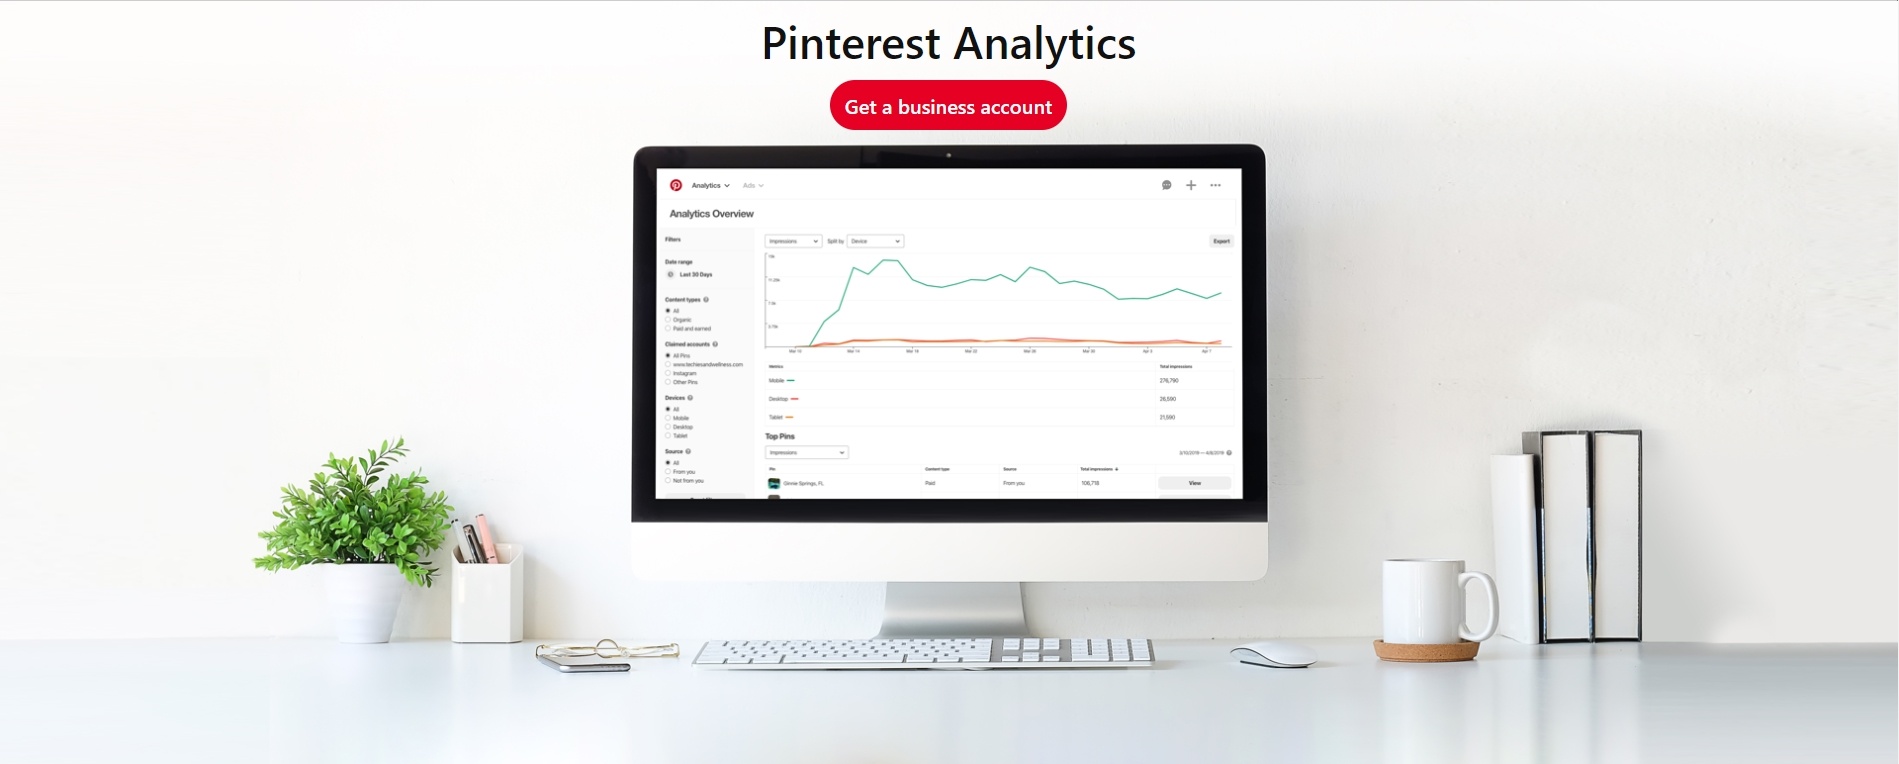 Overview of Pinterest Analytics on their business homepage for Pinterest Campaign